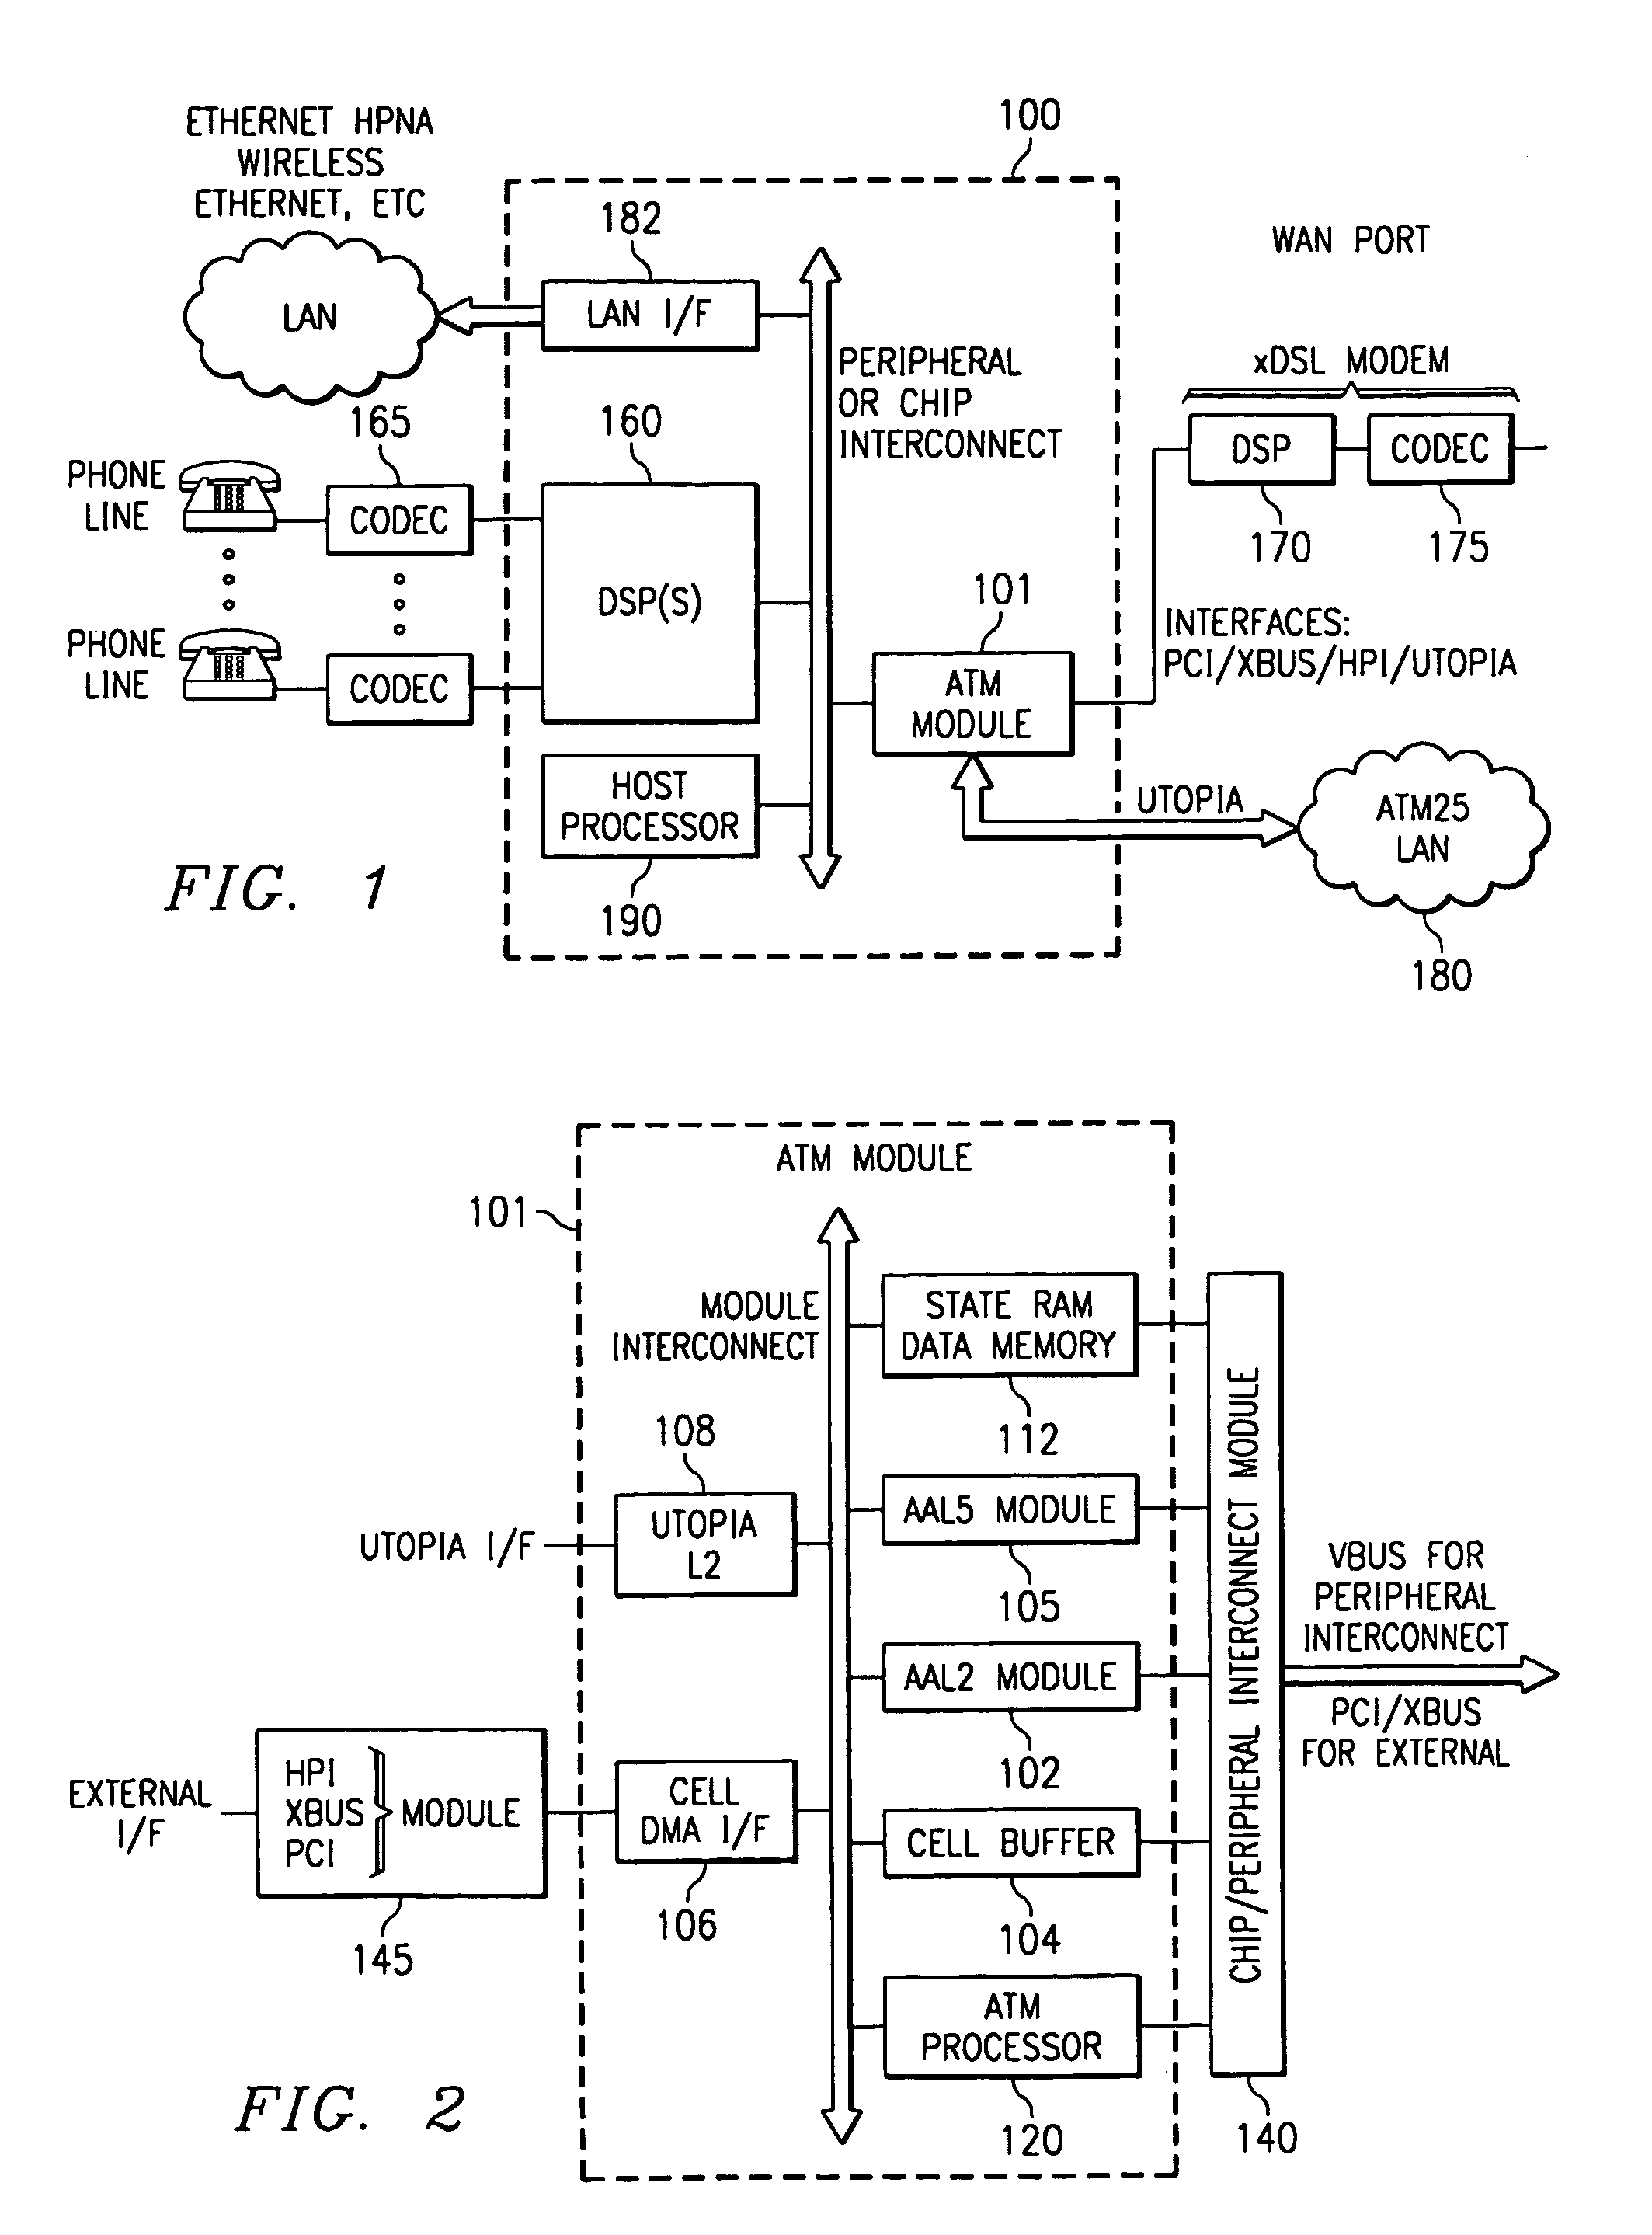 AAL2 receiver for filtering signaling/management packets in an ATM system